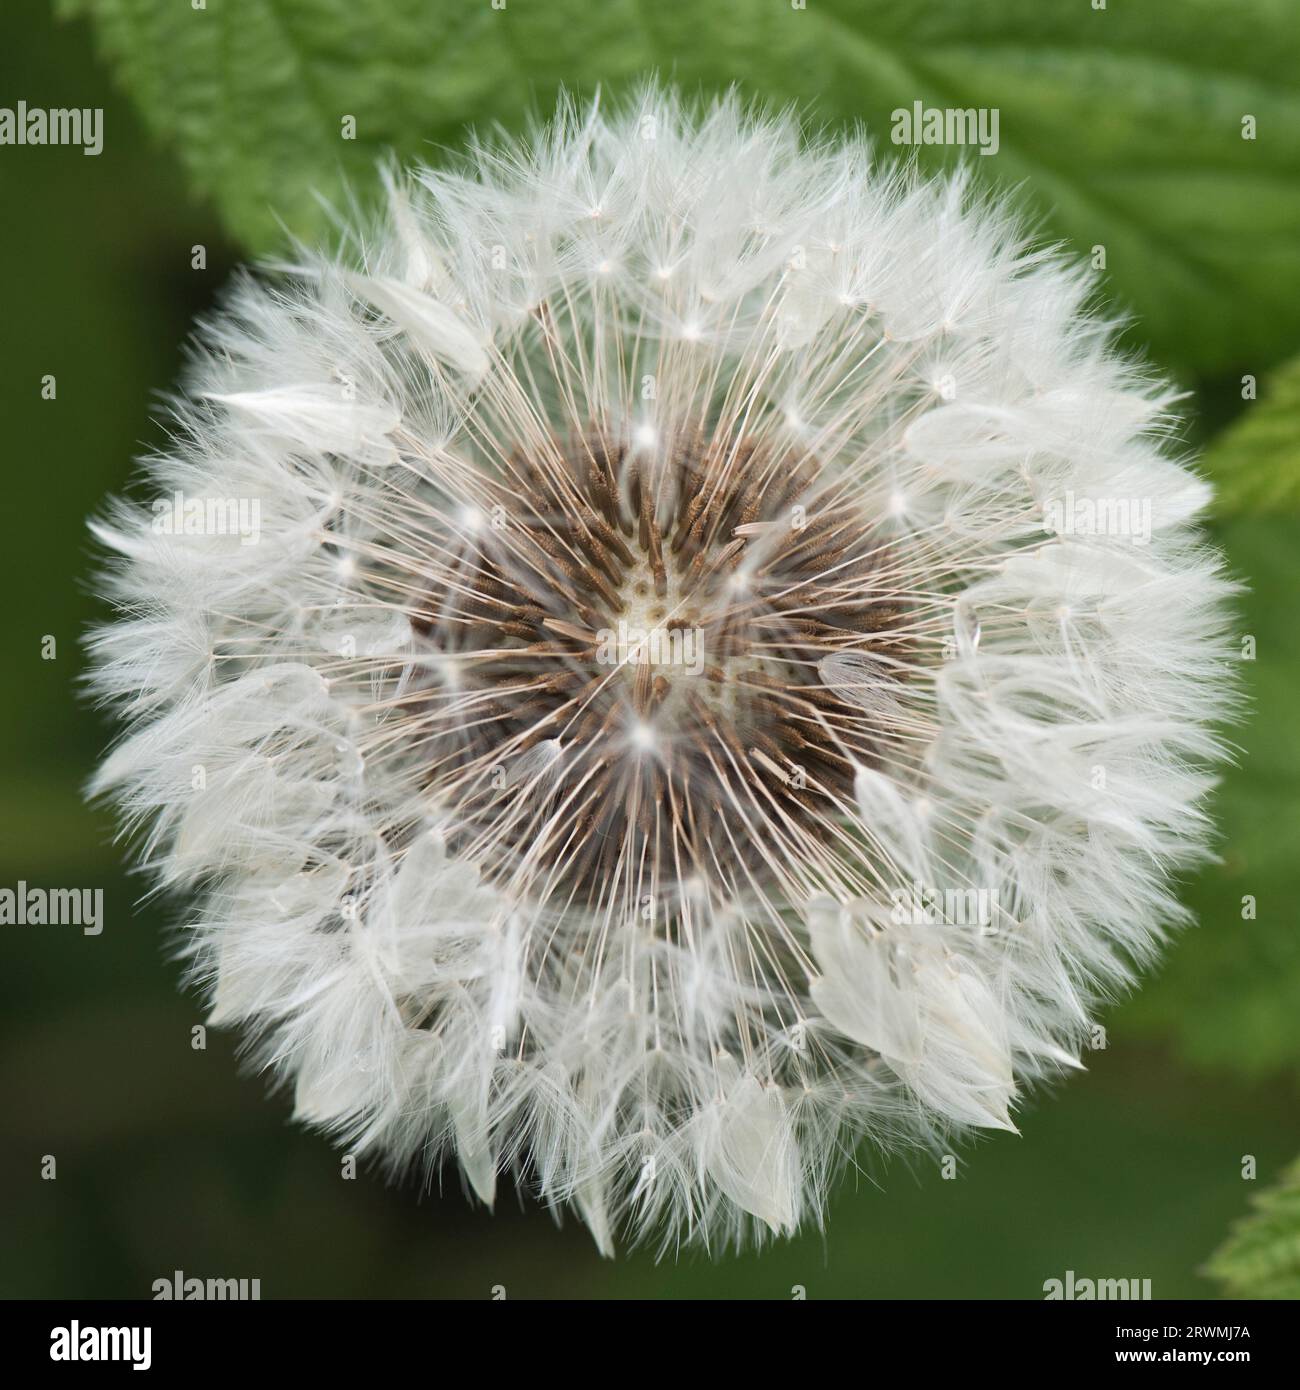 Seed head 'clock' of a dandelion (Taraxacum officinale) white pappi terminating in fruits or capsulae distributed by wind, Berkshire, May Stock Photo